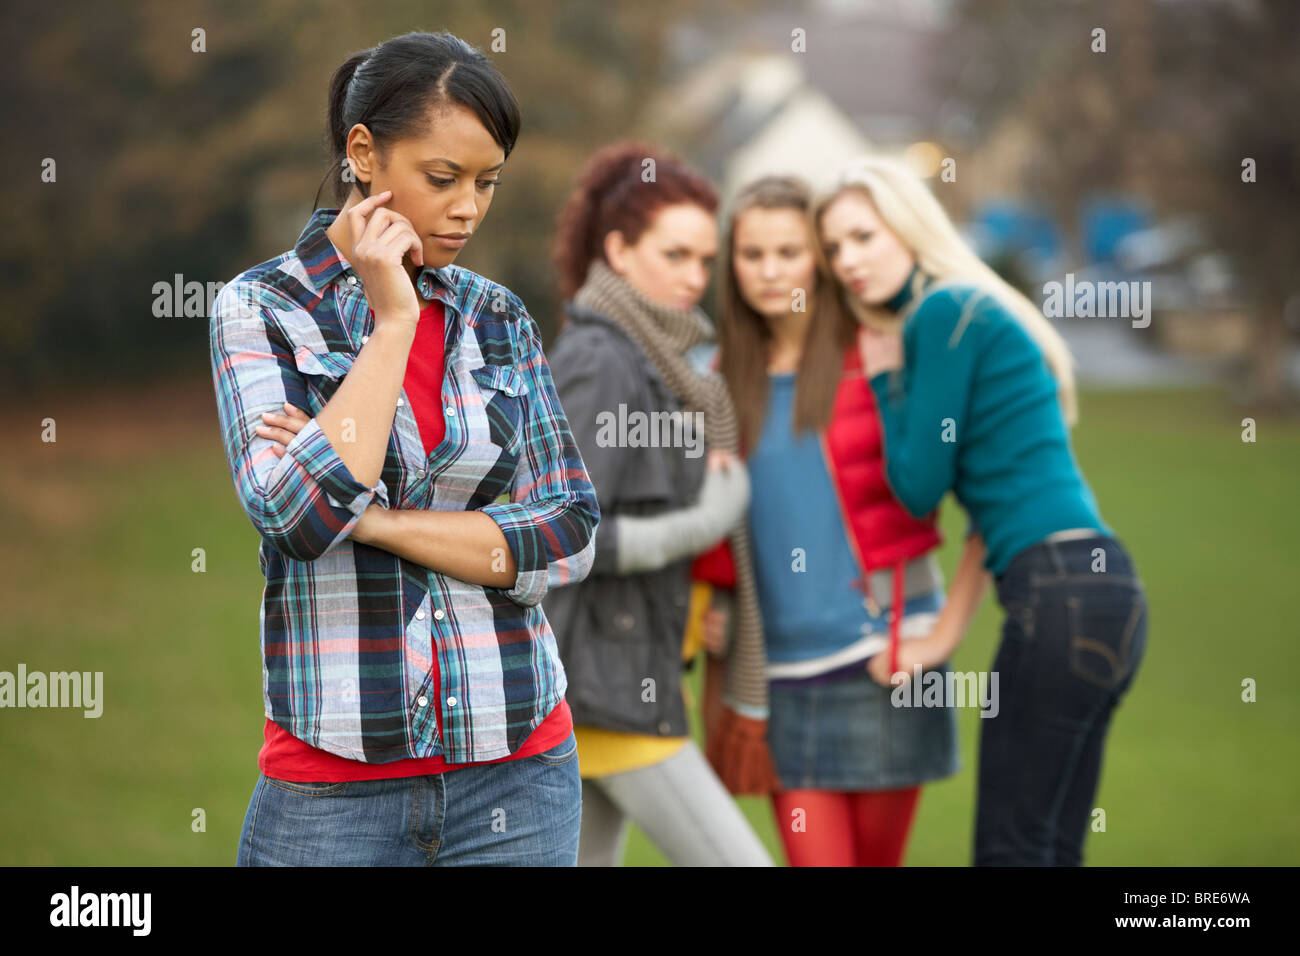 Upset Teenage Girl With Friends Gossiping In Background Stock Photo